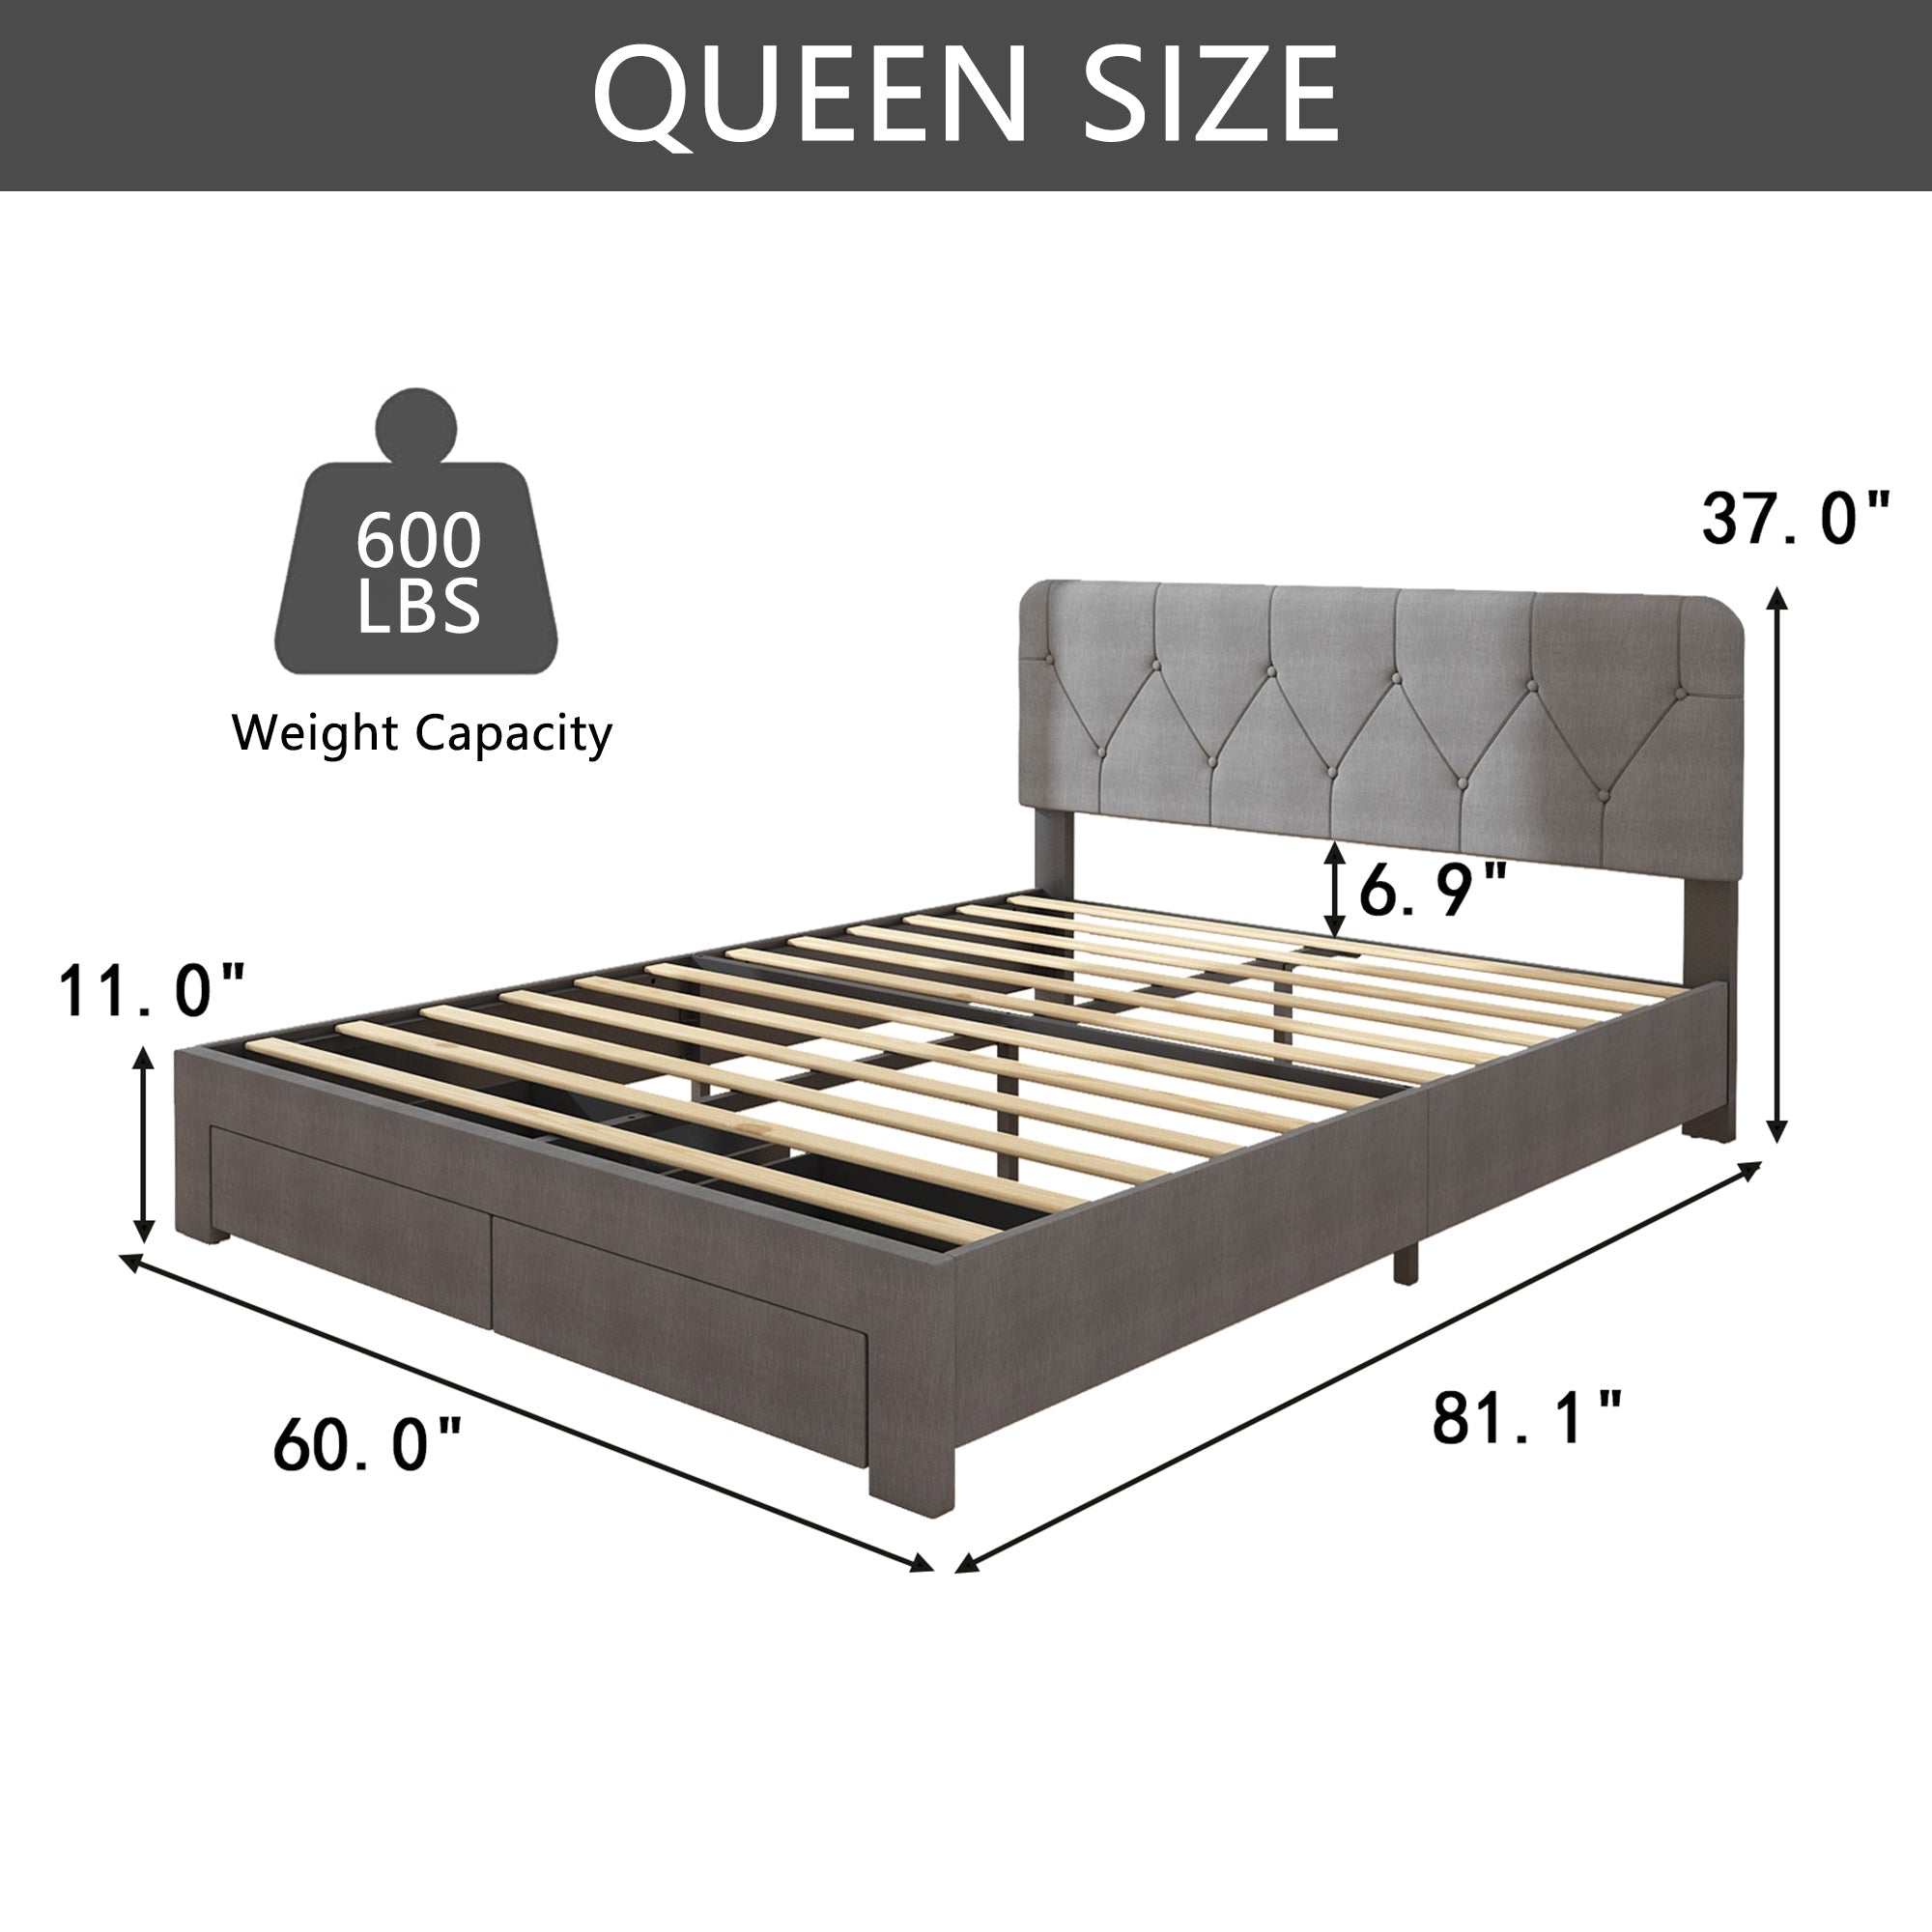 uhomepro Upholstered Platform Bed Frame, Modern Queen Size Storage Bed Frame with Upholstered Adjustable Headboard, 2 Drawers, Heavy Duty Queen Bed with Wood Slats, No Box Spring Needed, Gray